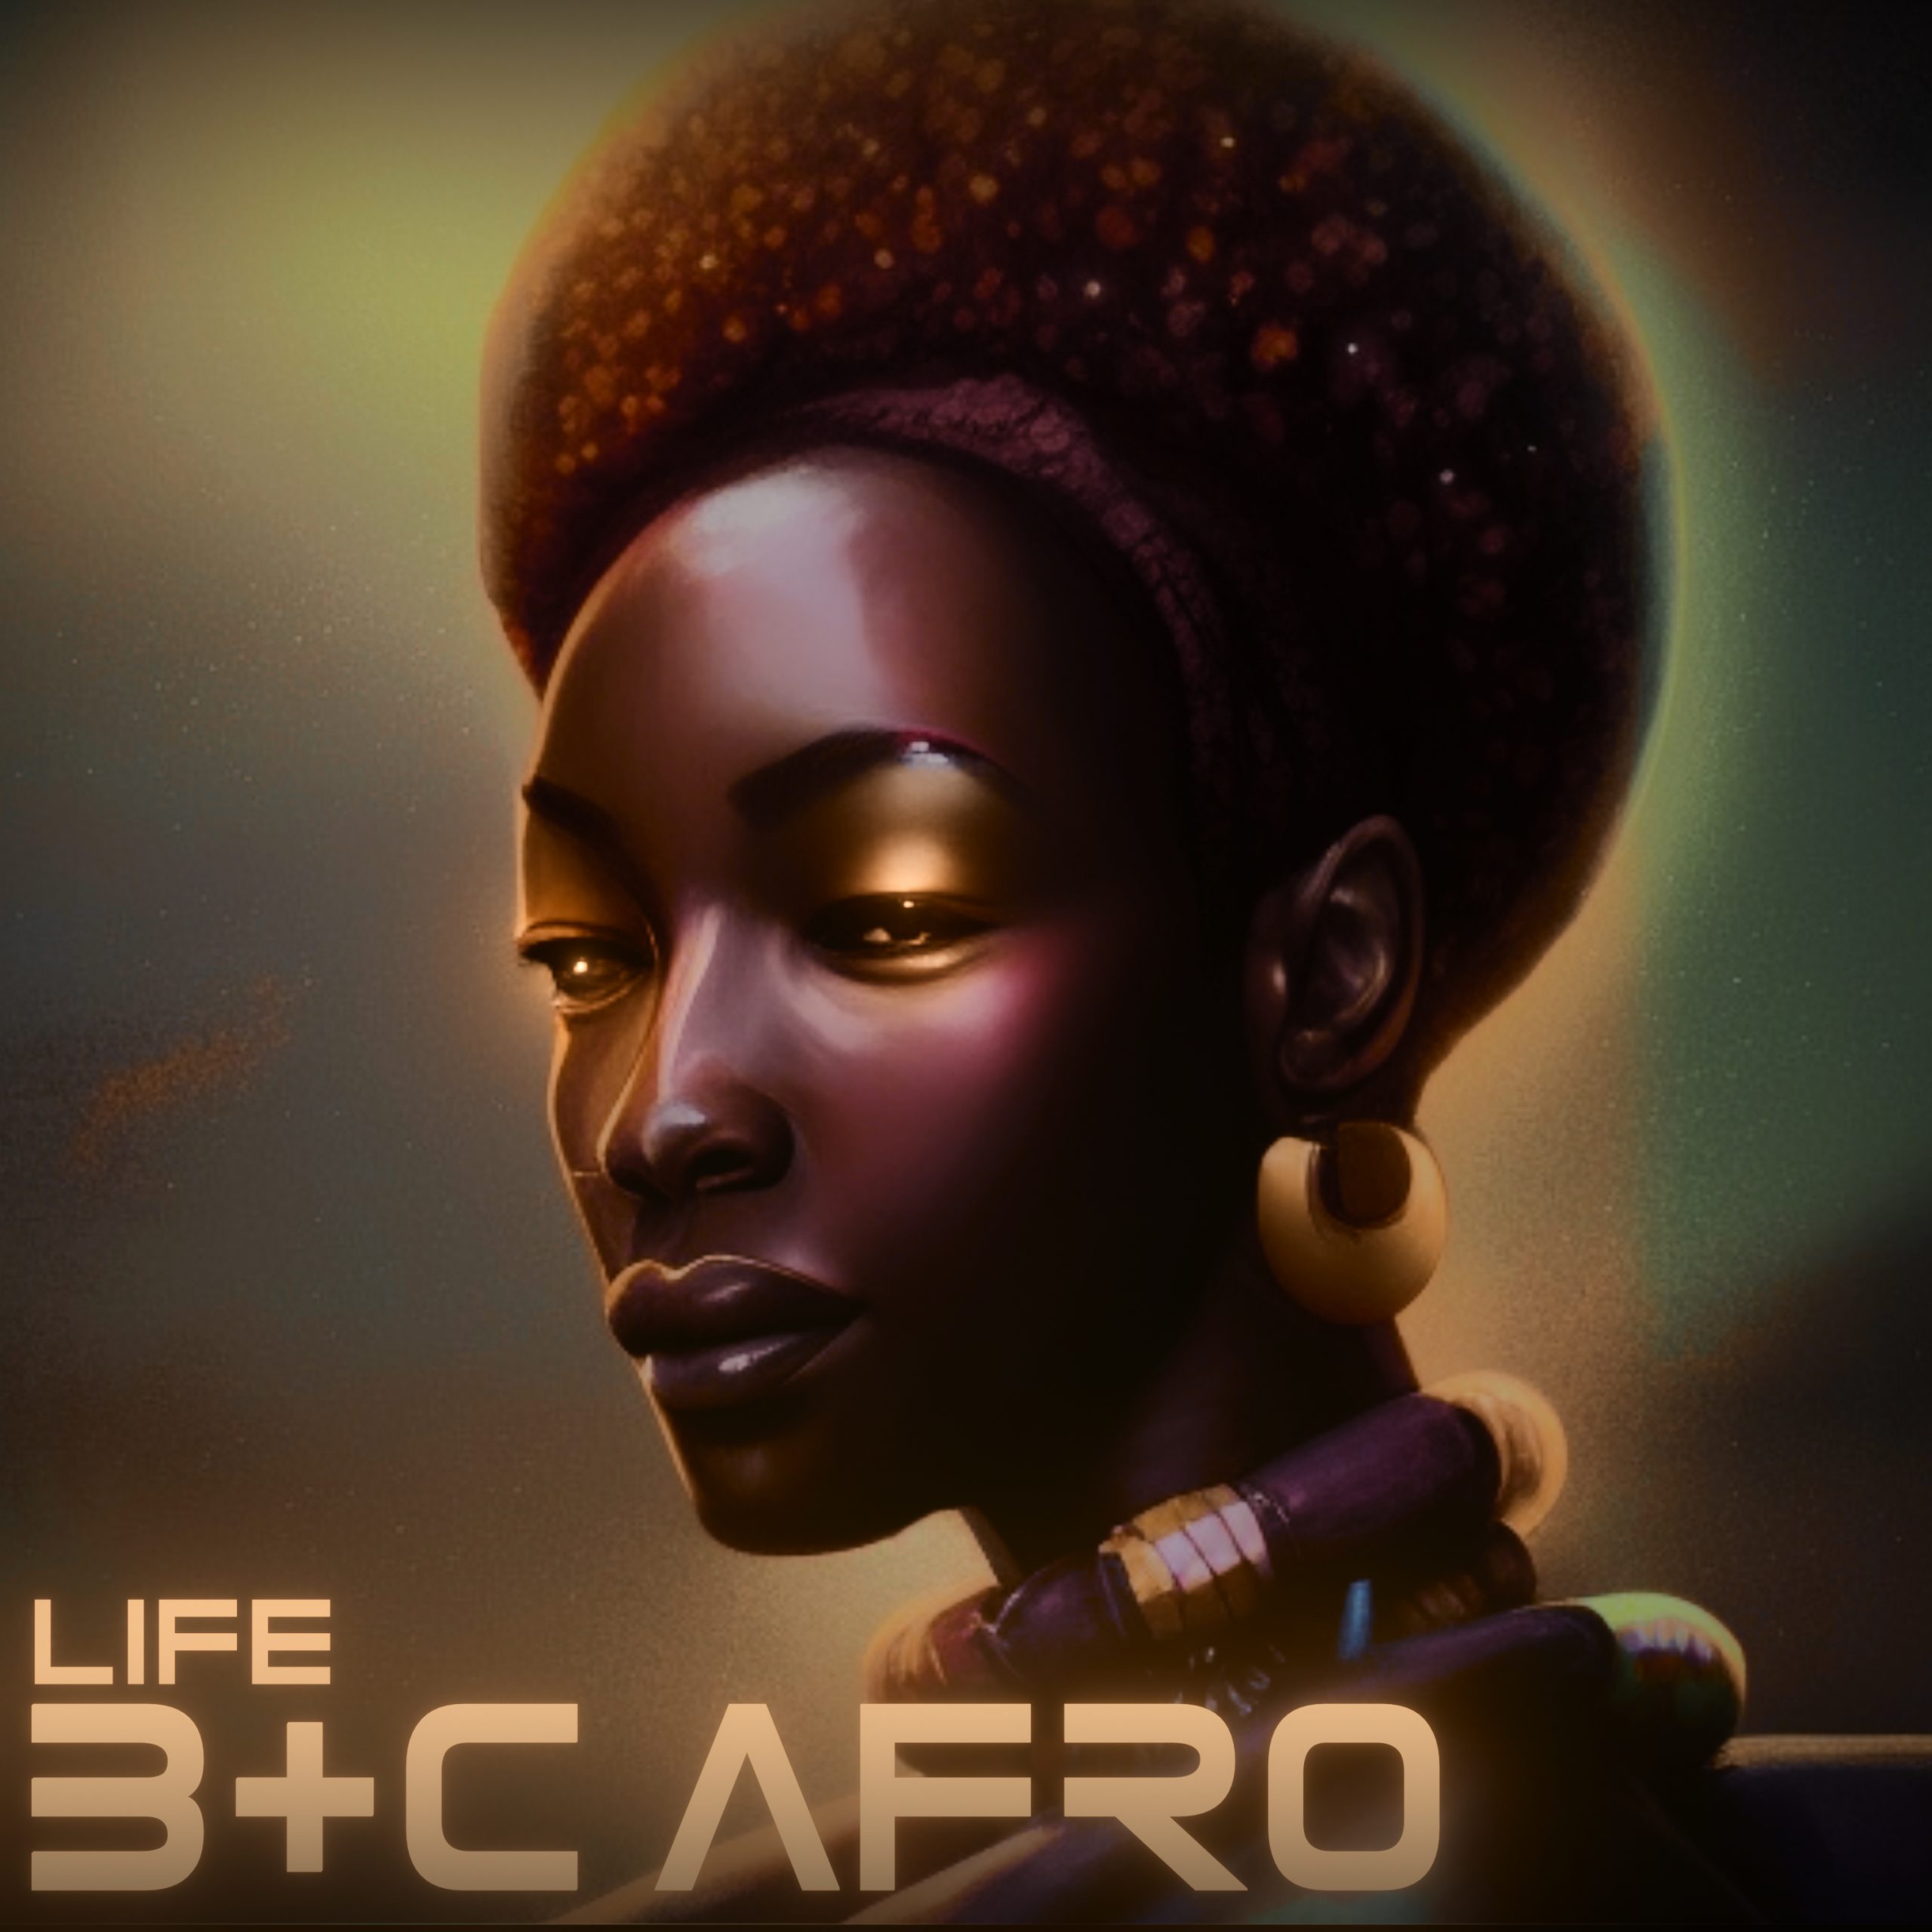 B+C Afro Releases Hook Afro House, Pop Dance Track ‘Life’ – Now added to Bafana FM Playlist.